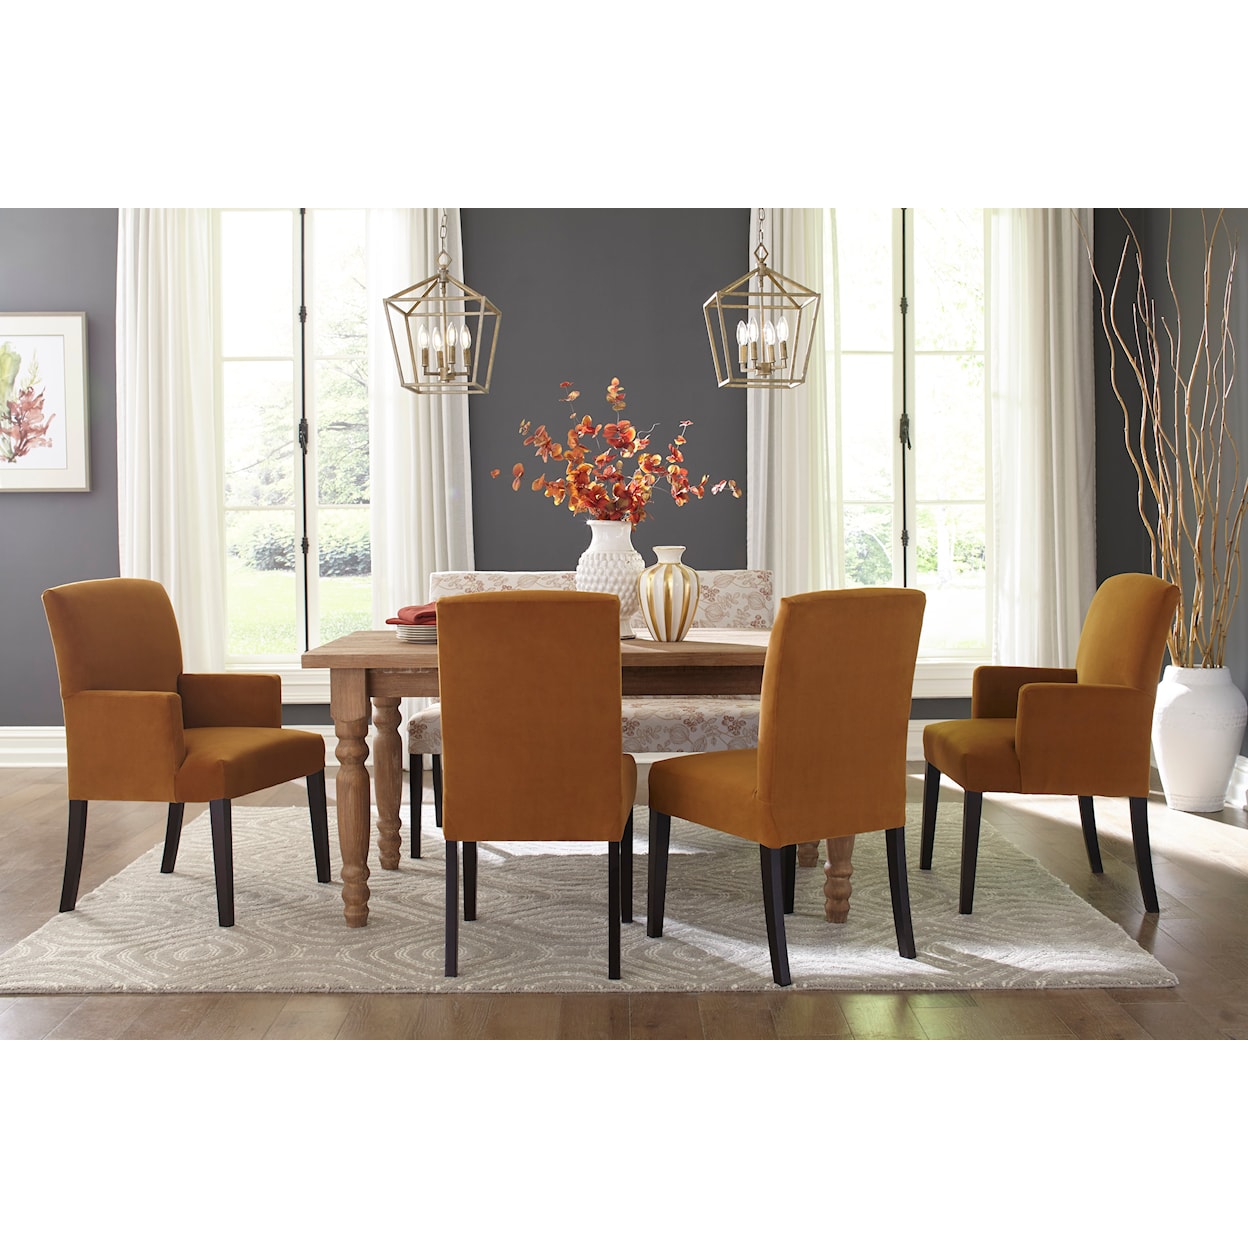 Bravo Furniture Myer Set of 2 Dining Chairs